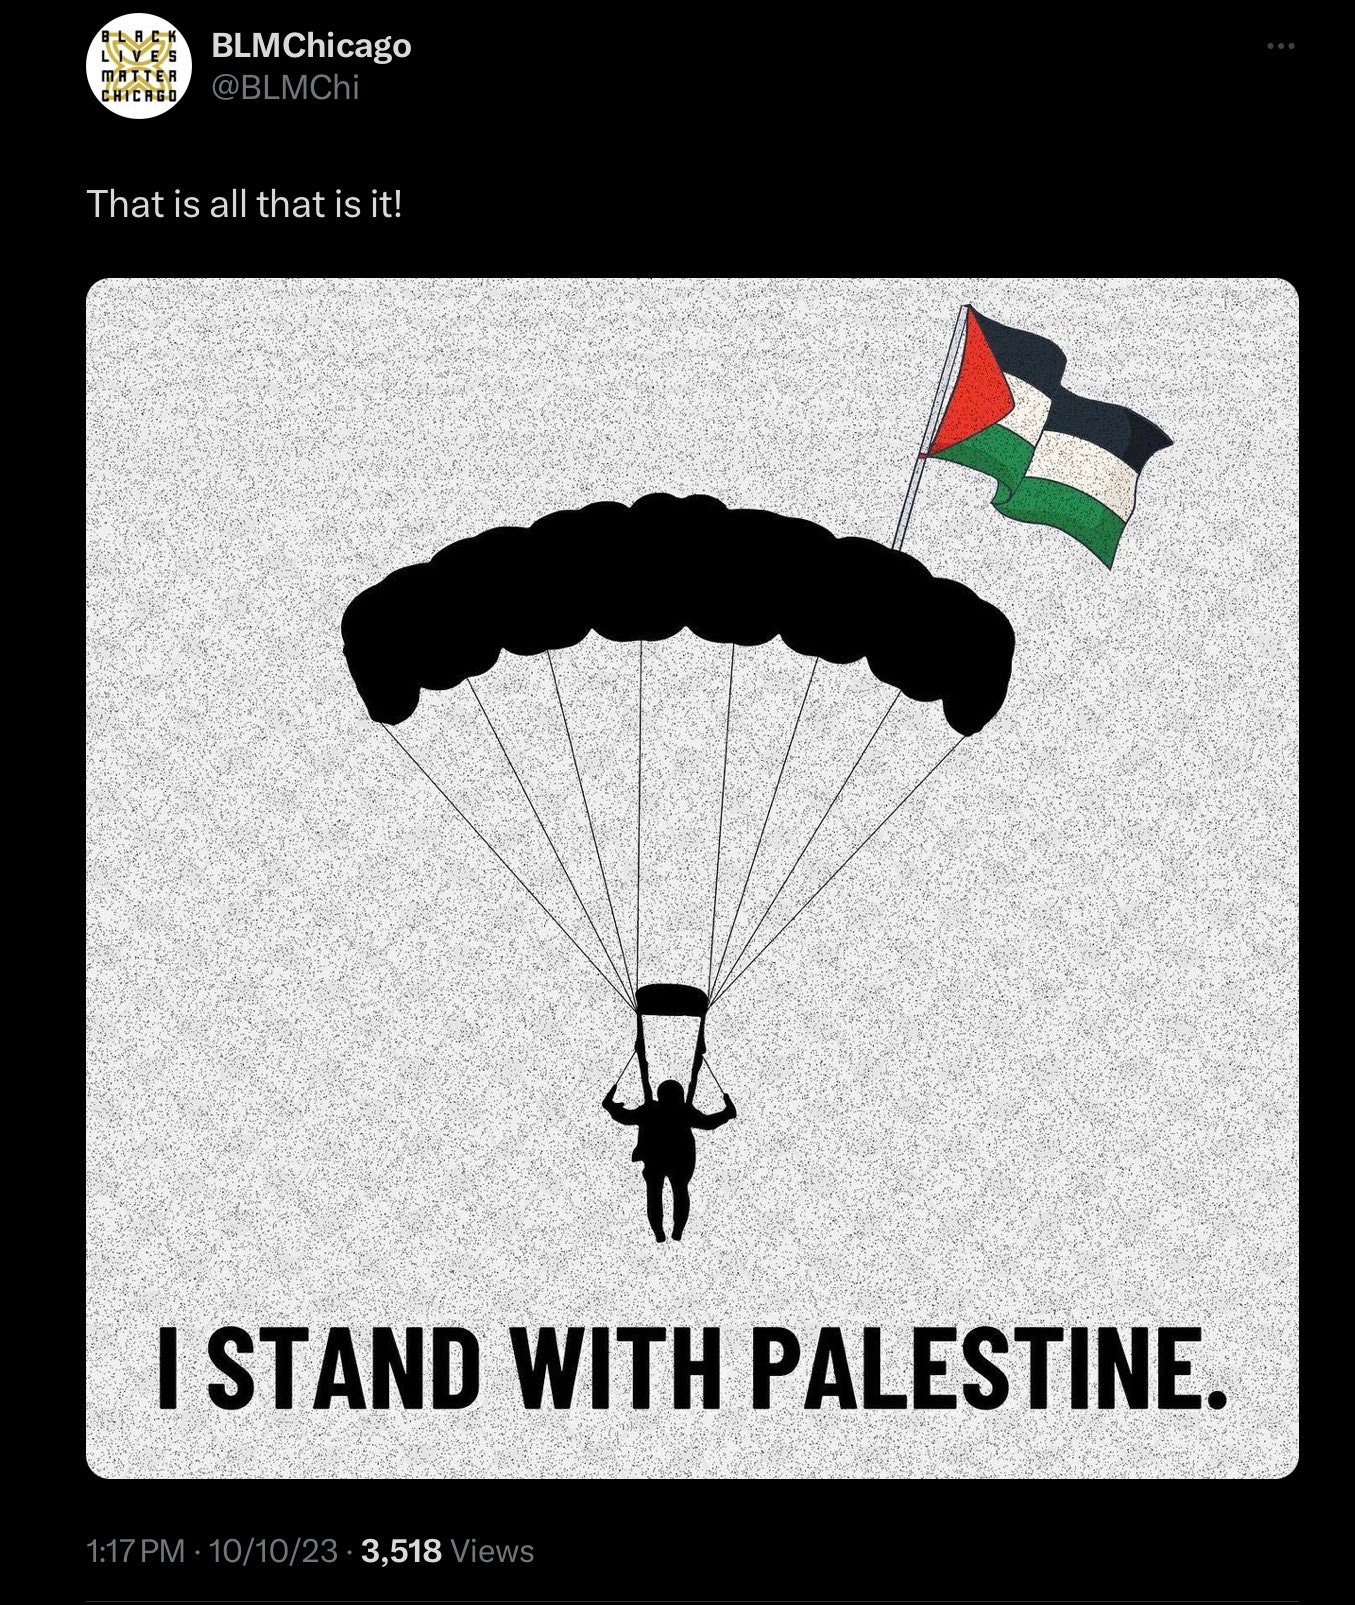 A post from BLM Chicago featuring a stylized image of a terrorist gliding into Israel and the words “I stand with Palestine”